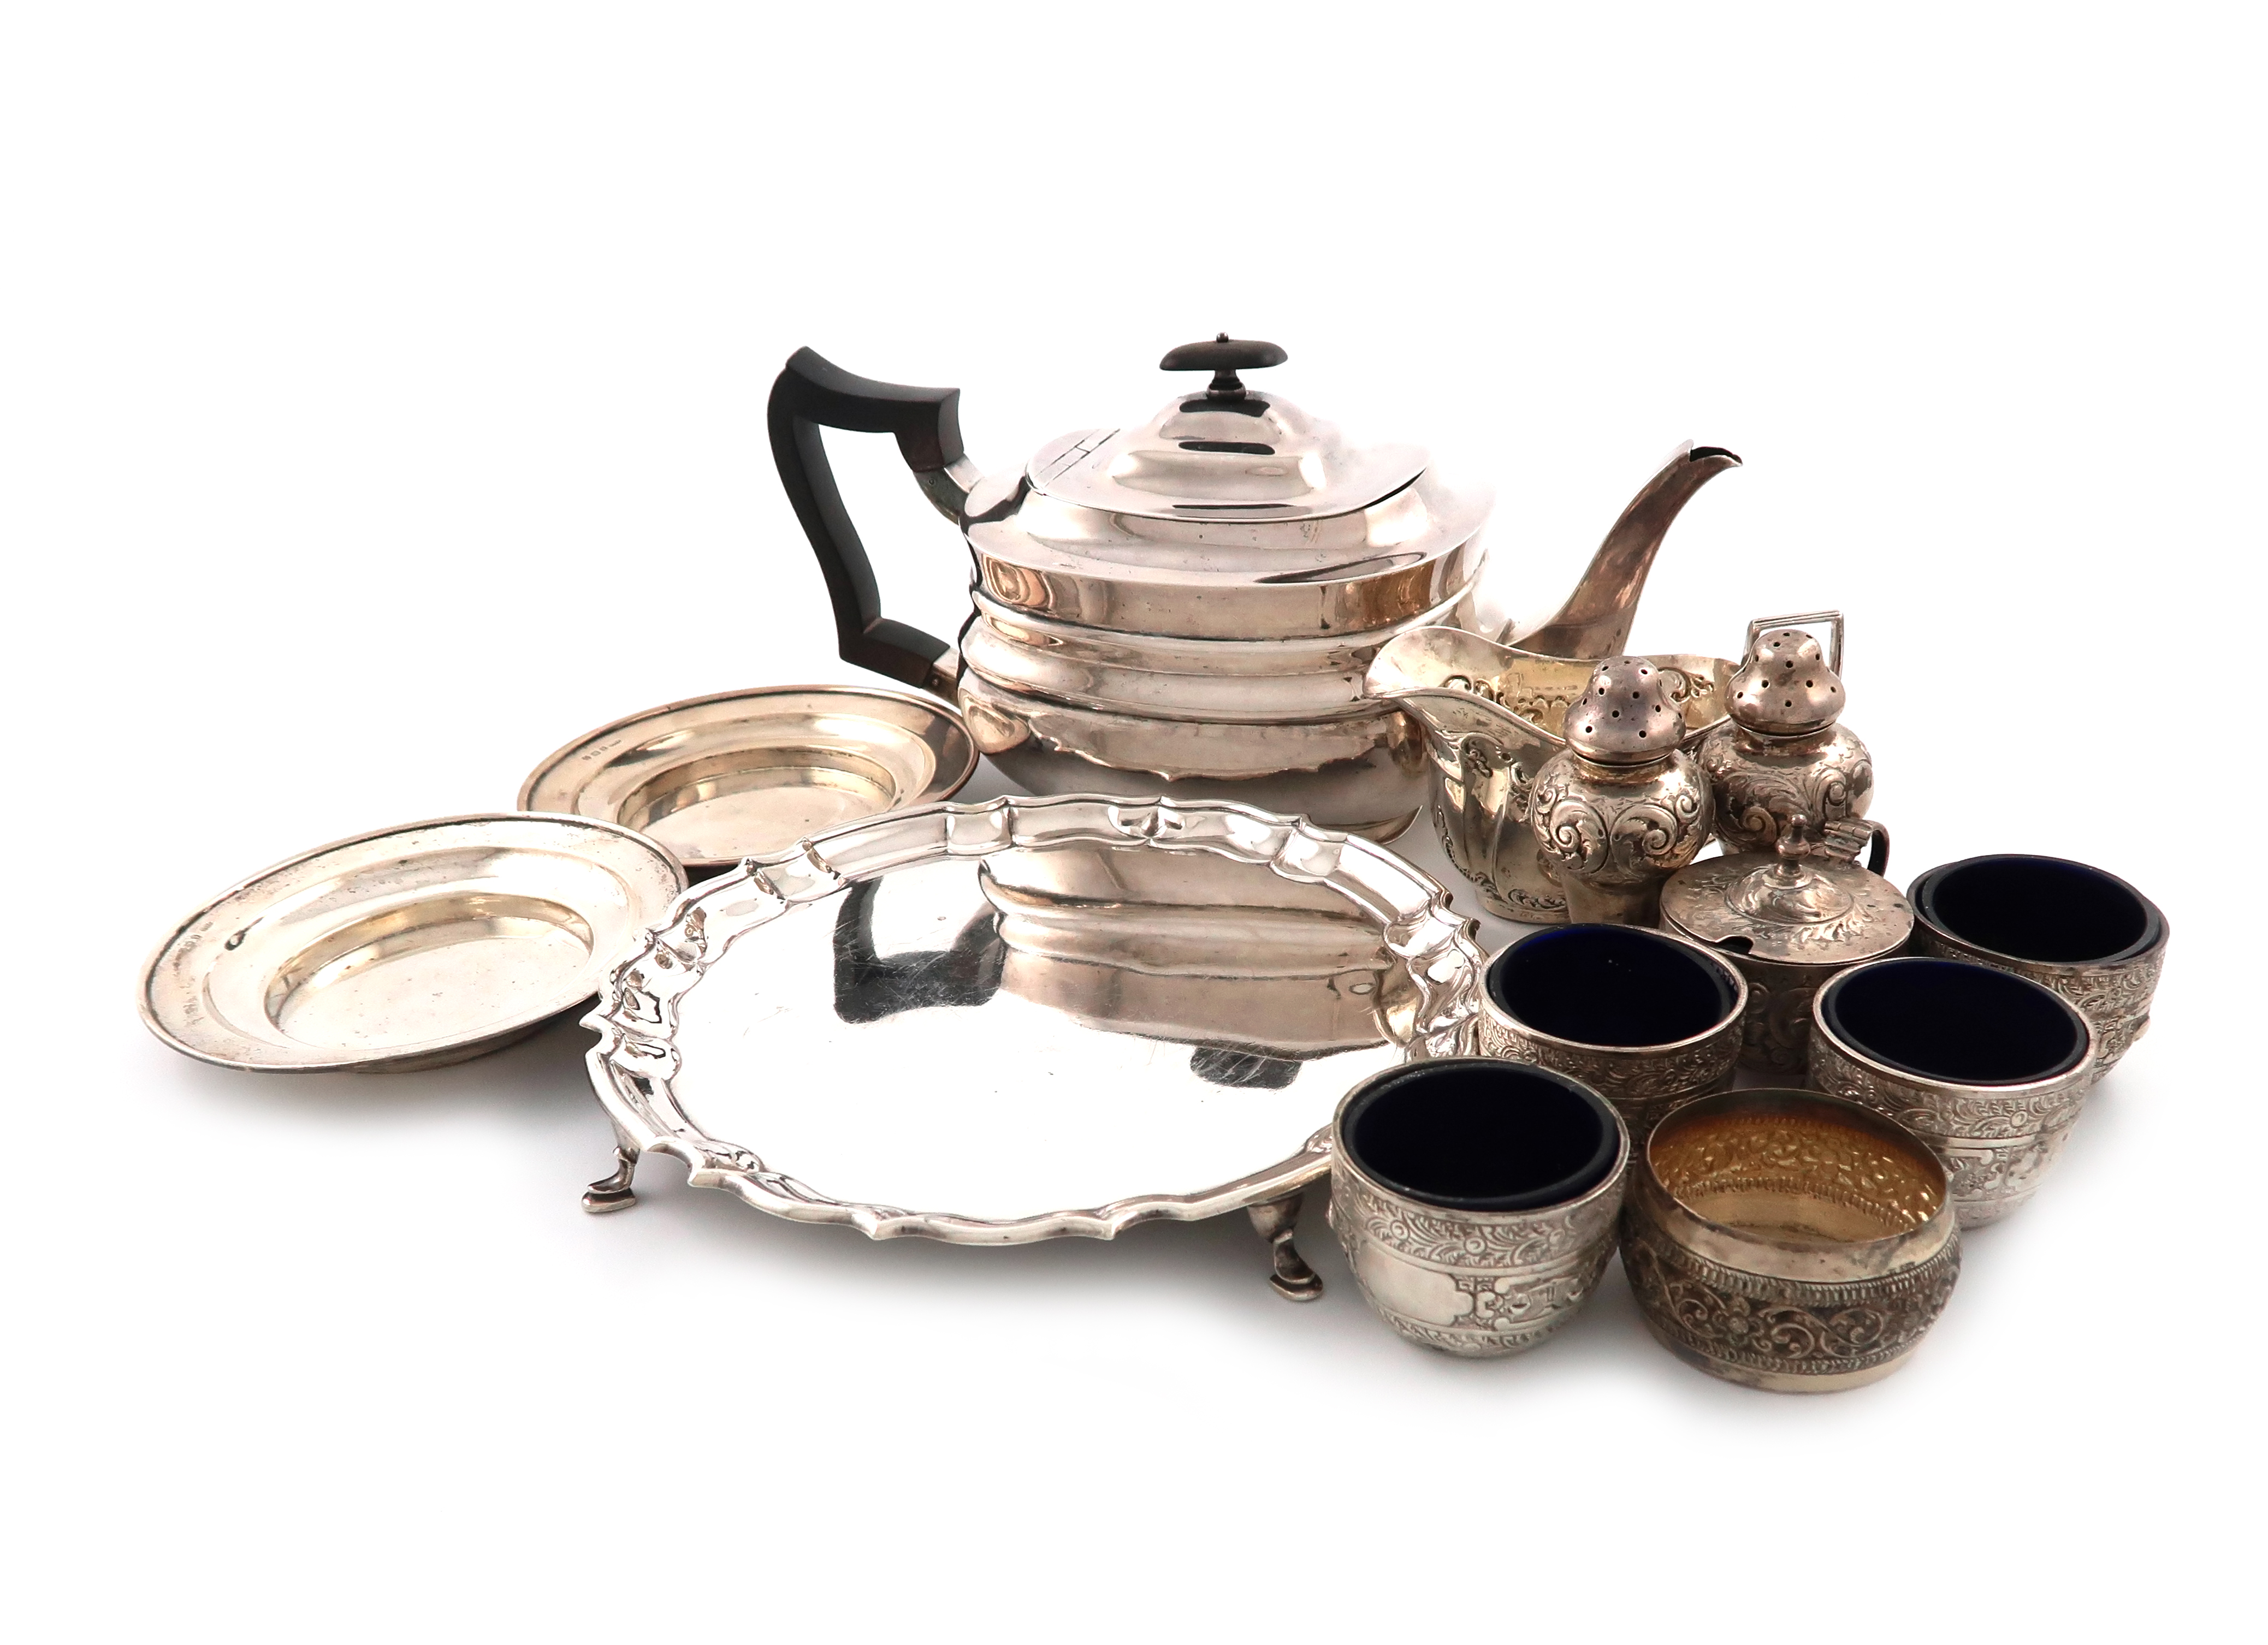 A mixed lot of silver items, comprising: a teapot, by William Hutton and Sons, London 1909, oblong